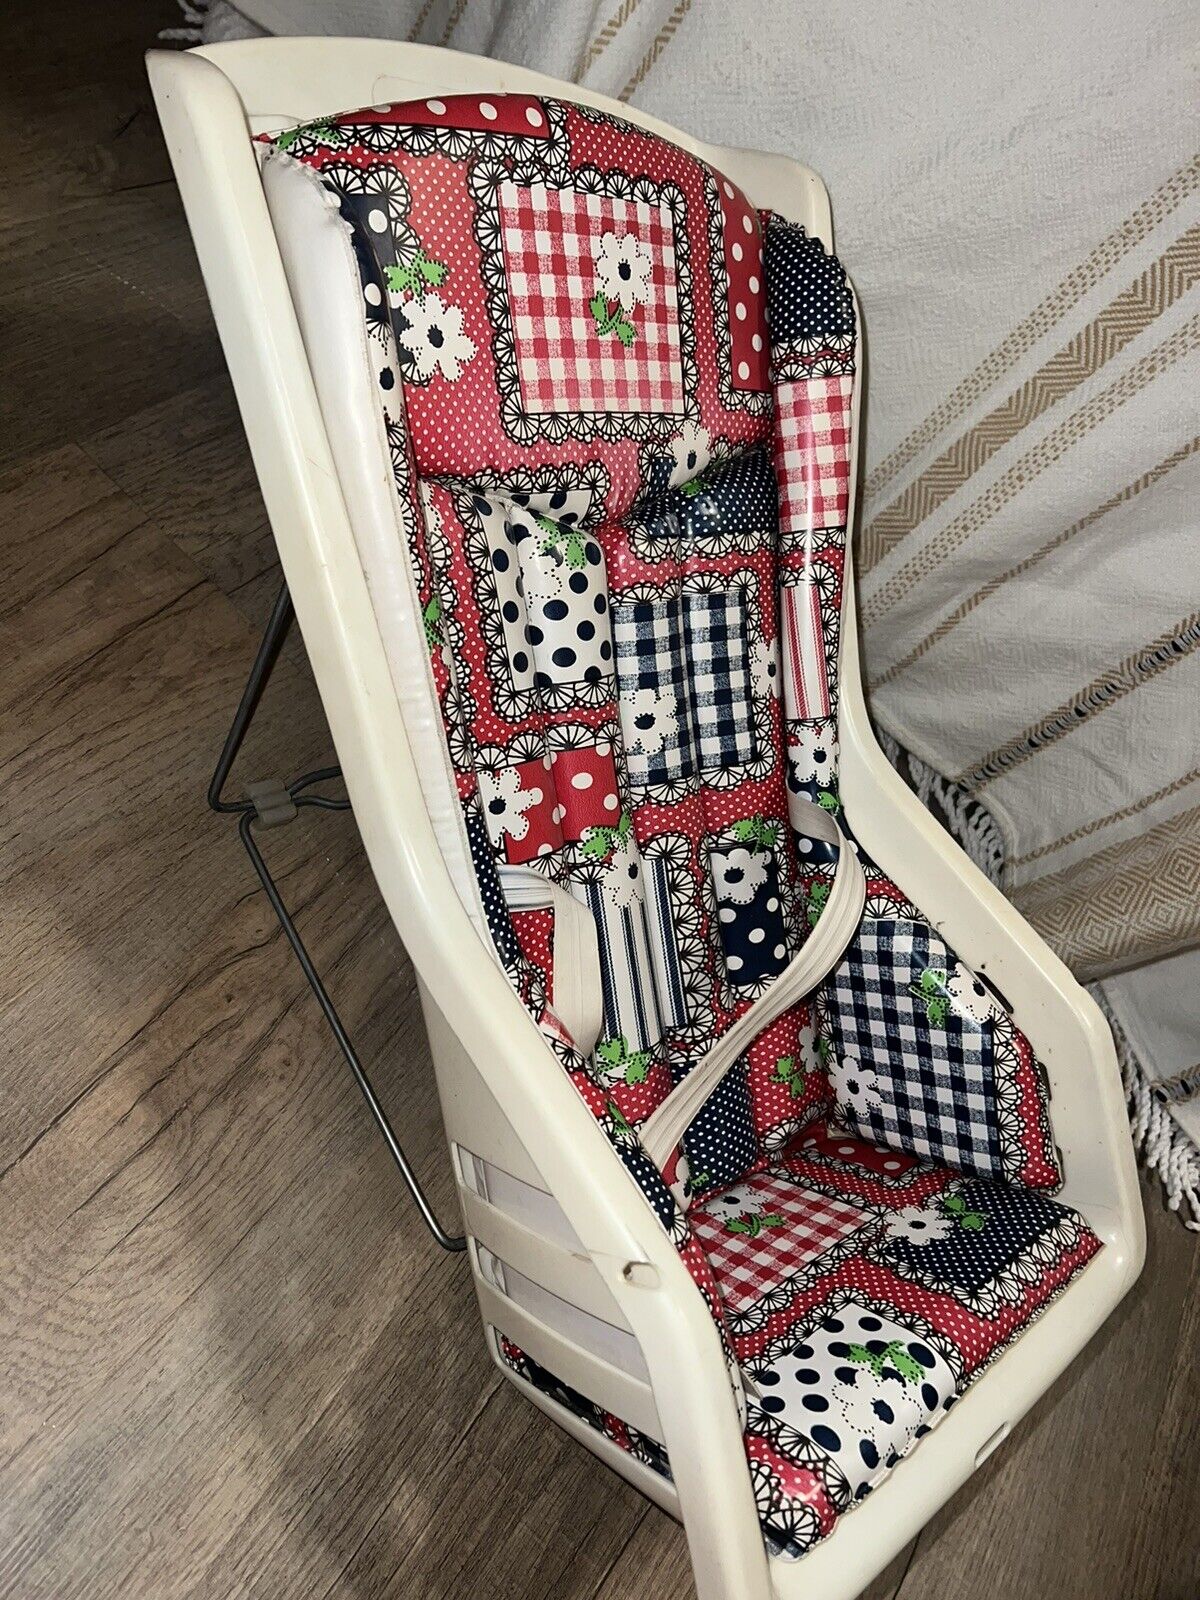 Vintage 1960s Baby Seat Tot Toter Infant Carrier Nice Patchwork Print In EUC